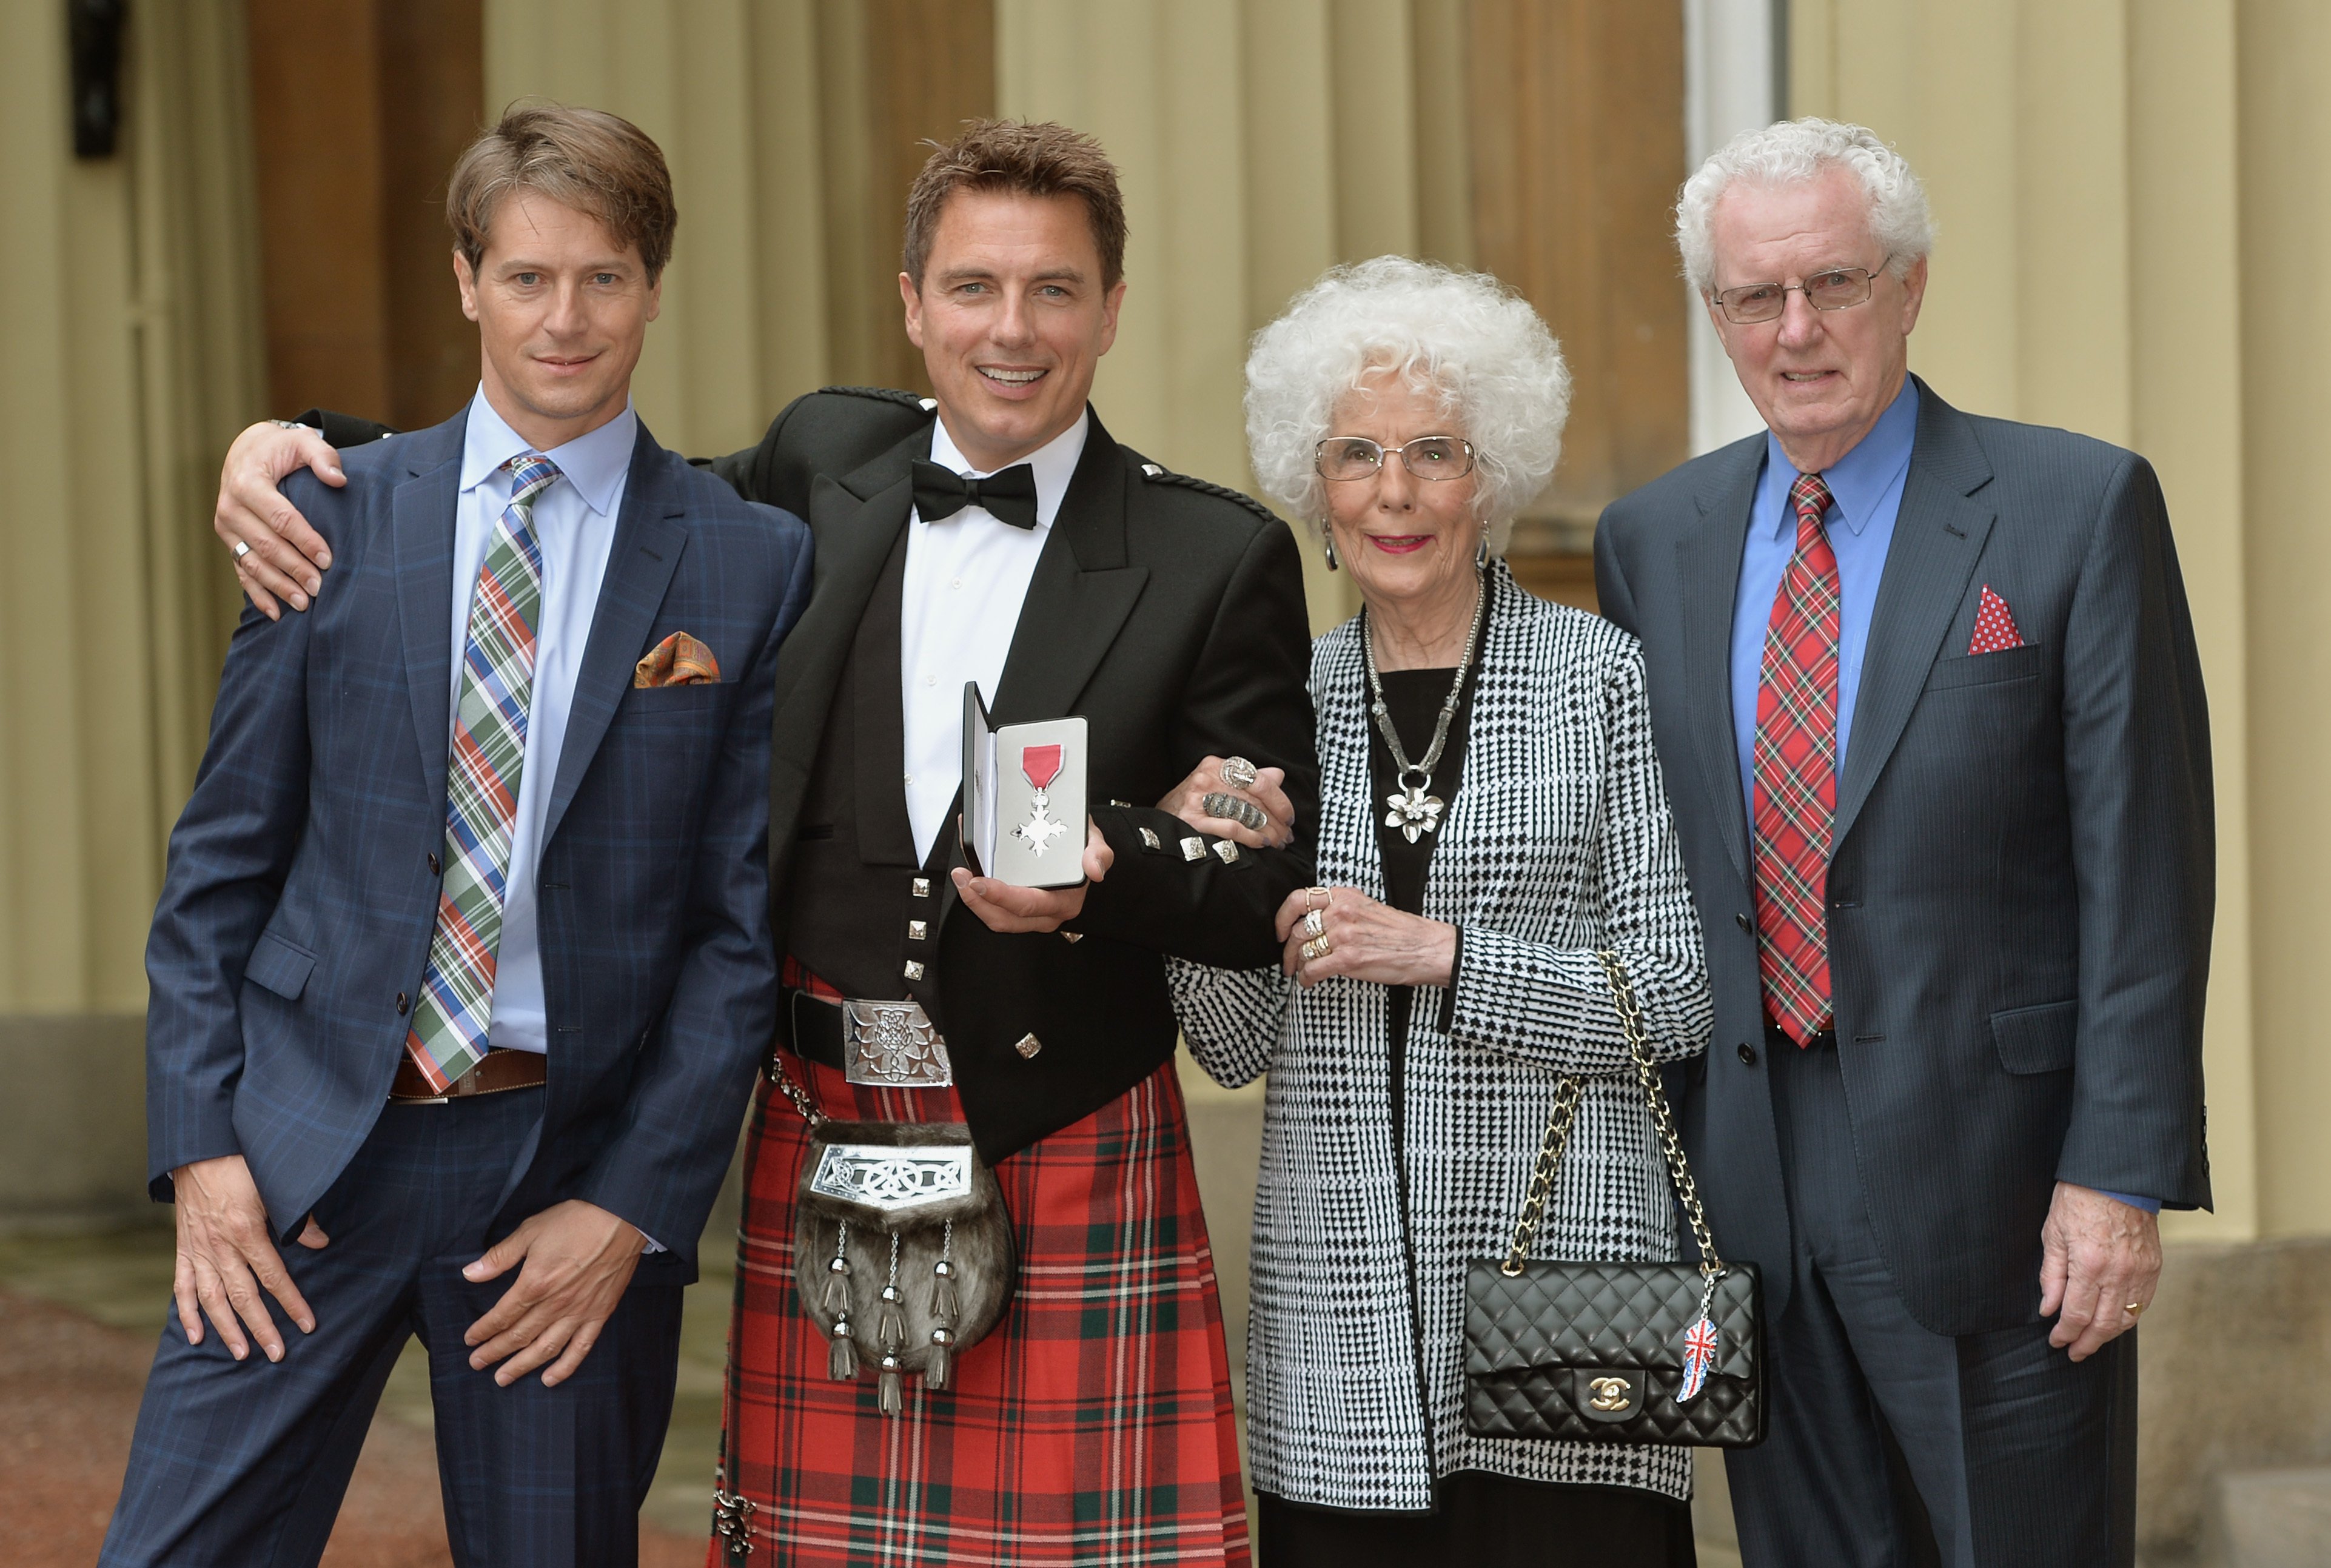 John Barrowman (2nd L) poses with husband Scott Gill (L) and parents Marion and John Barrowman after being awarded an MBE at an investiture ceremony at Buckingham Palace on October 14, 2014, in London, England. | Source: Getty Images